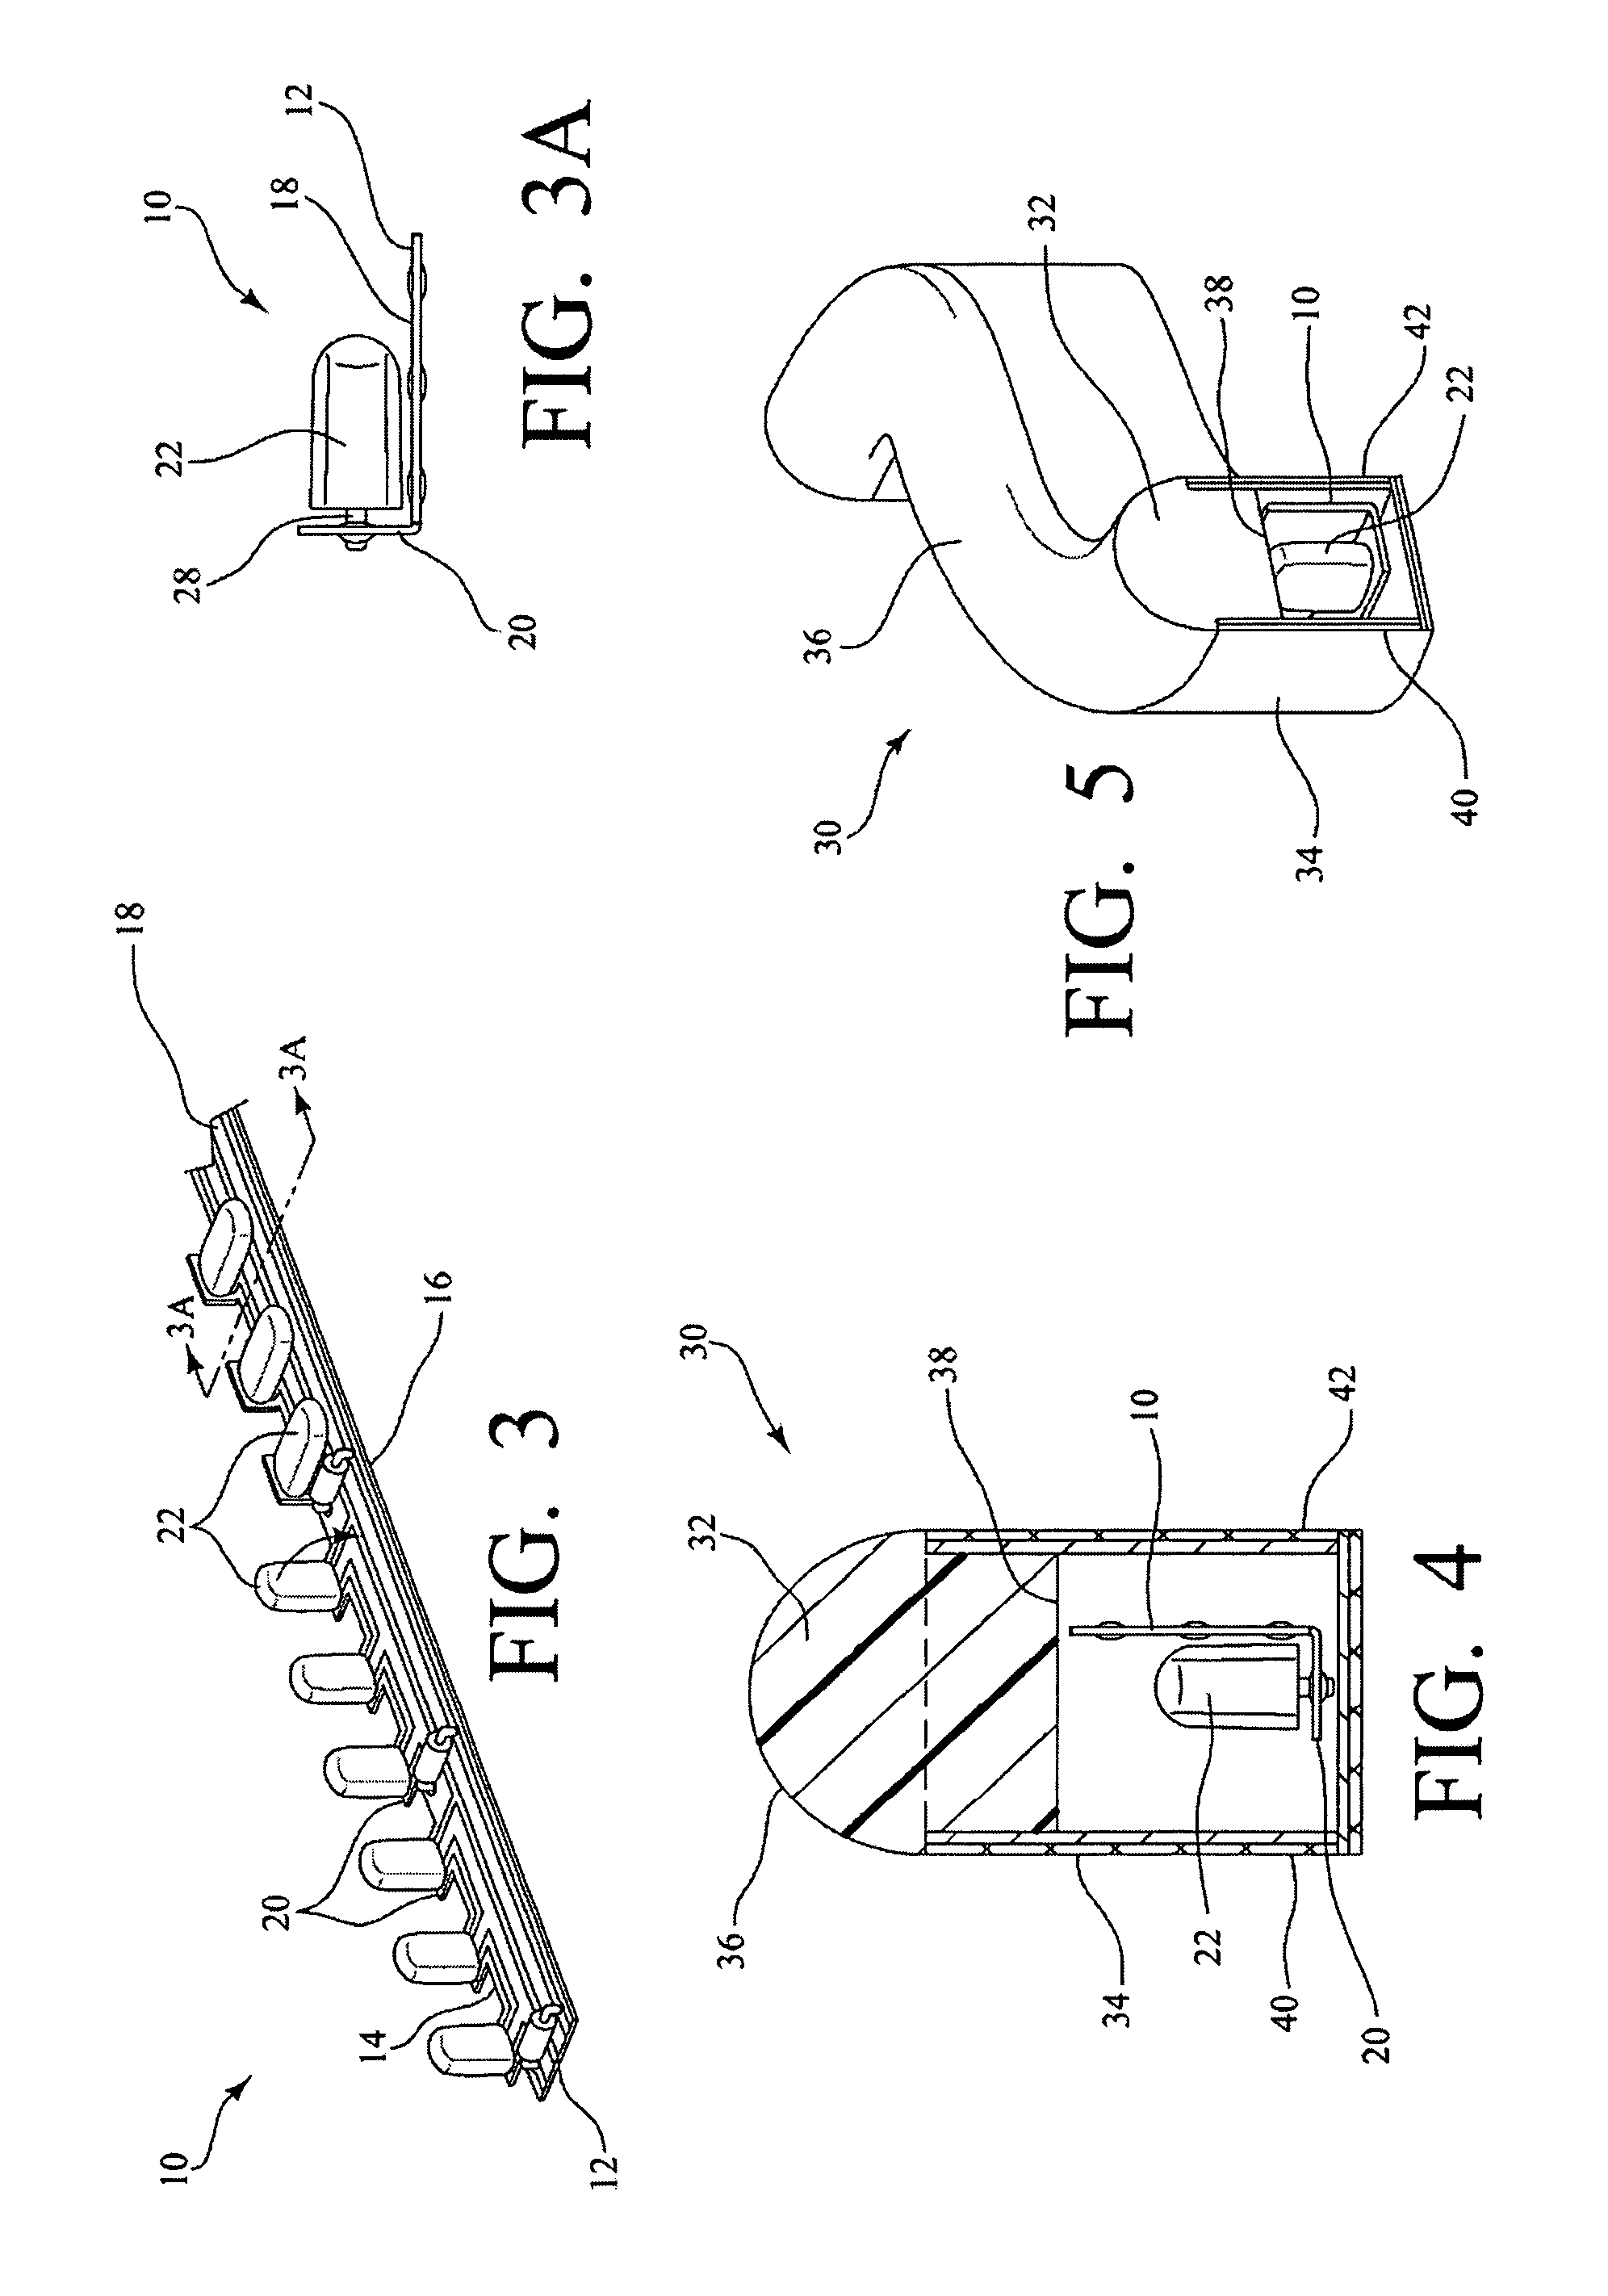 Tabbed circuit board and method for manufacturing same